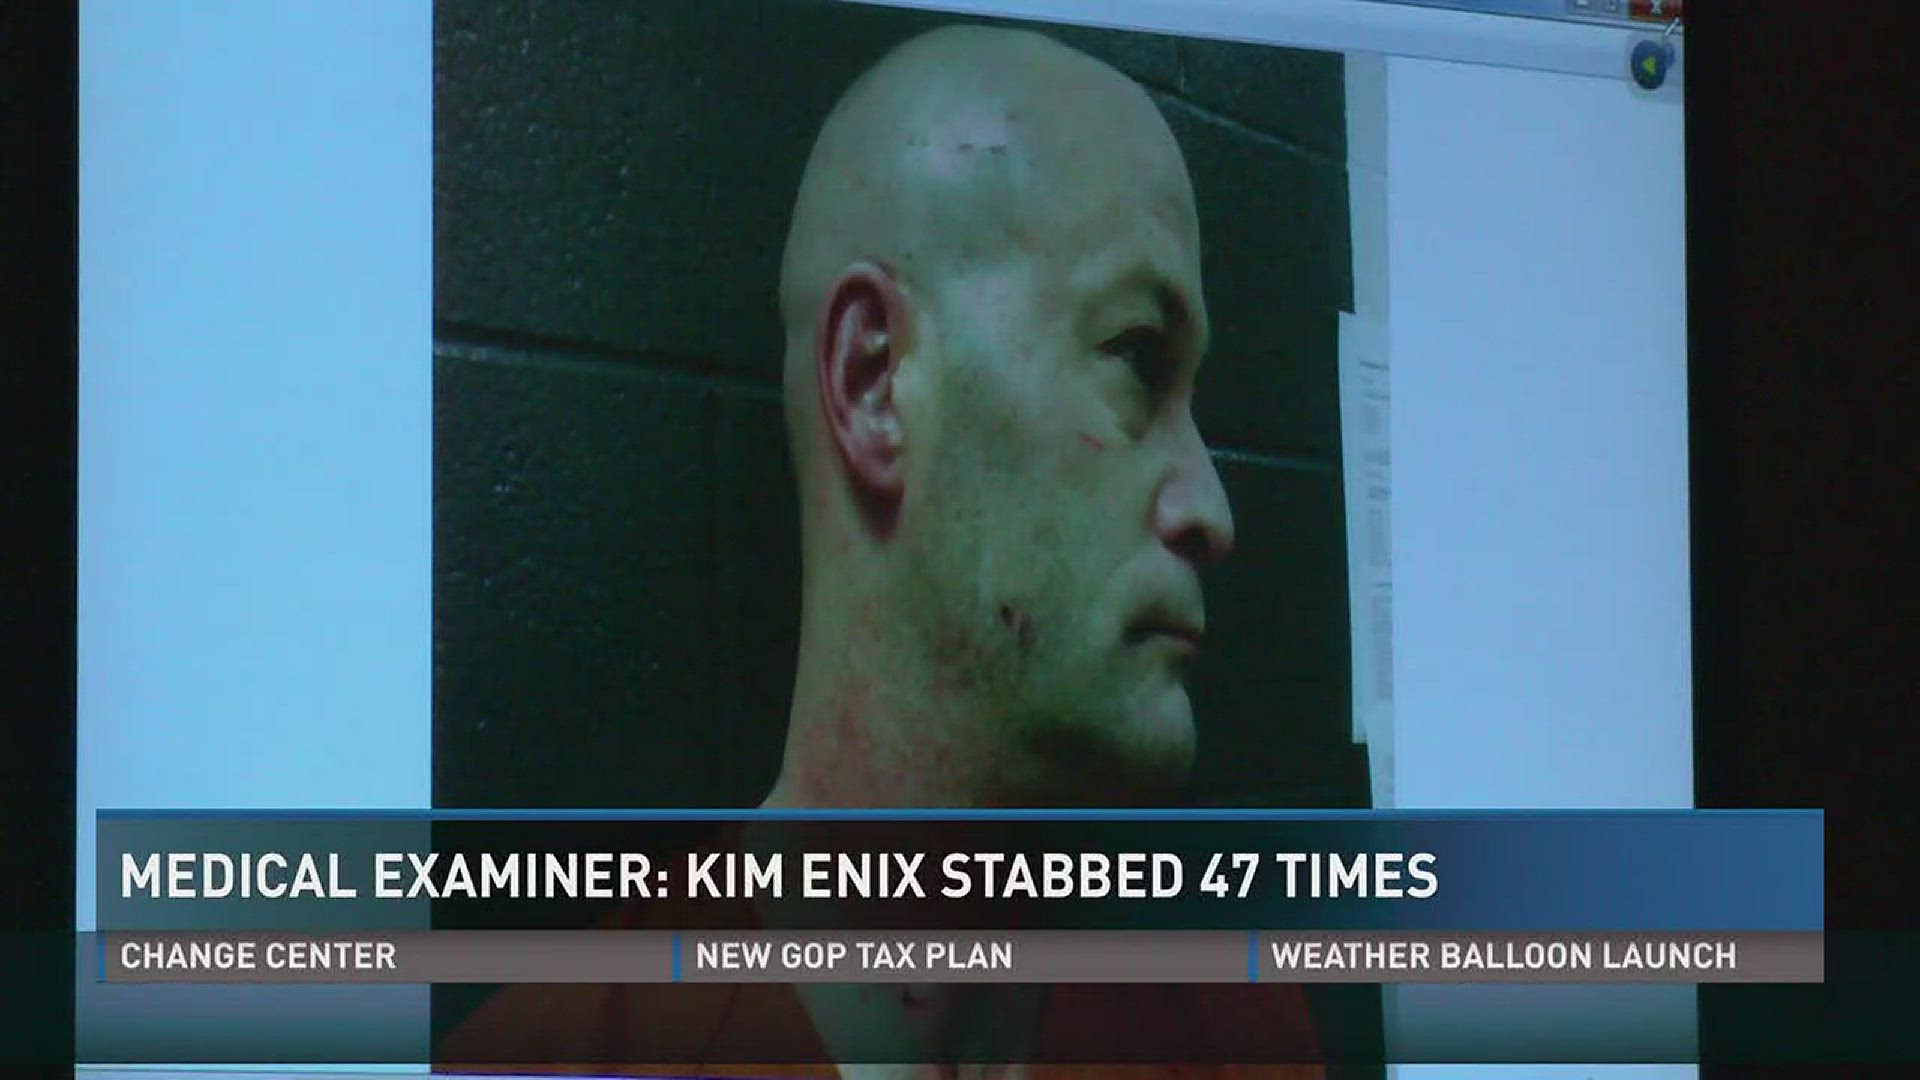 Tyler Enix is facing trial for stabbing his wife Kimberly 47 times, then kidnapping their little girl.